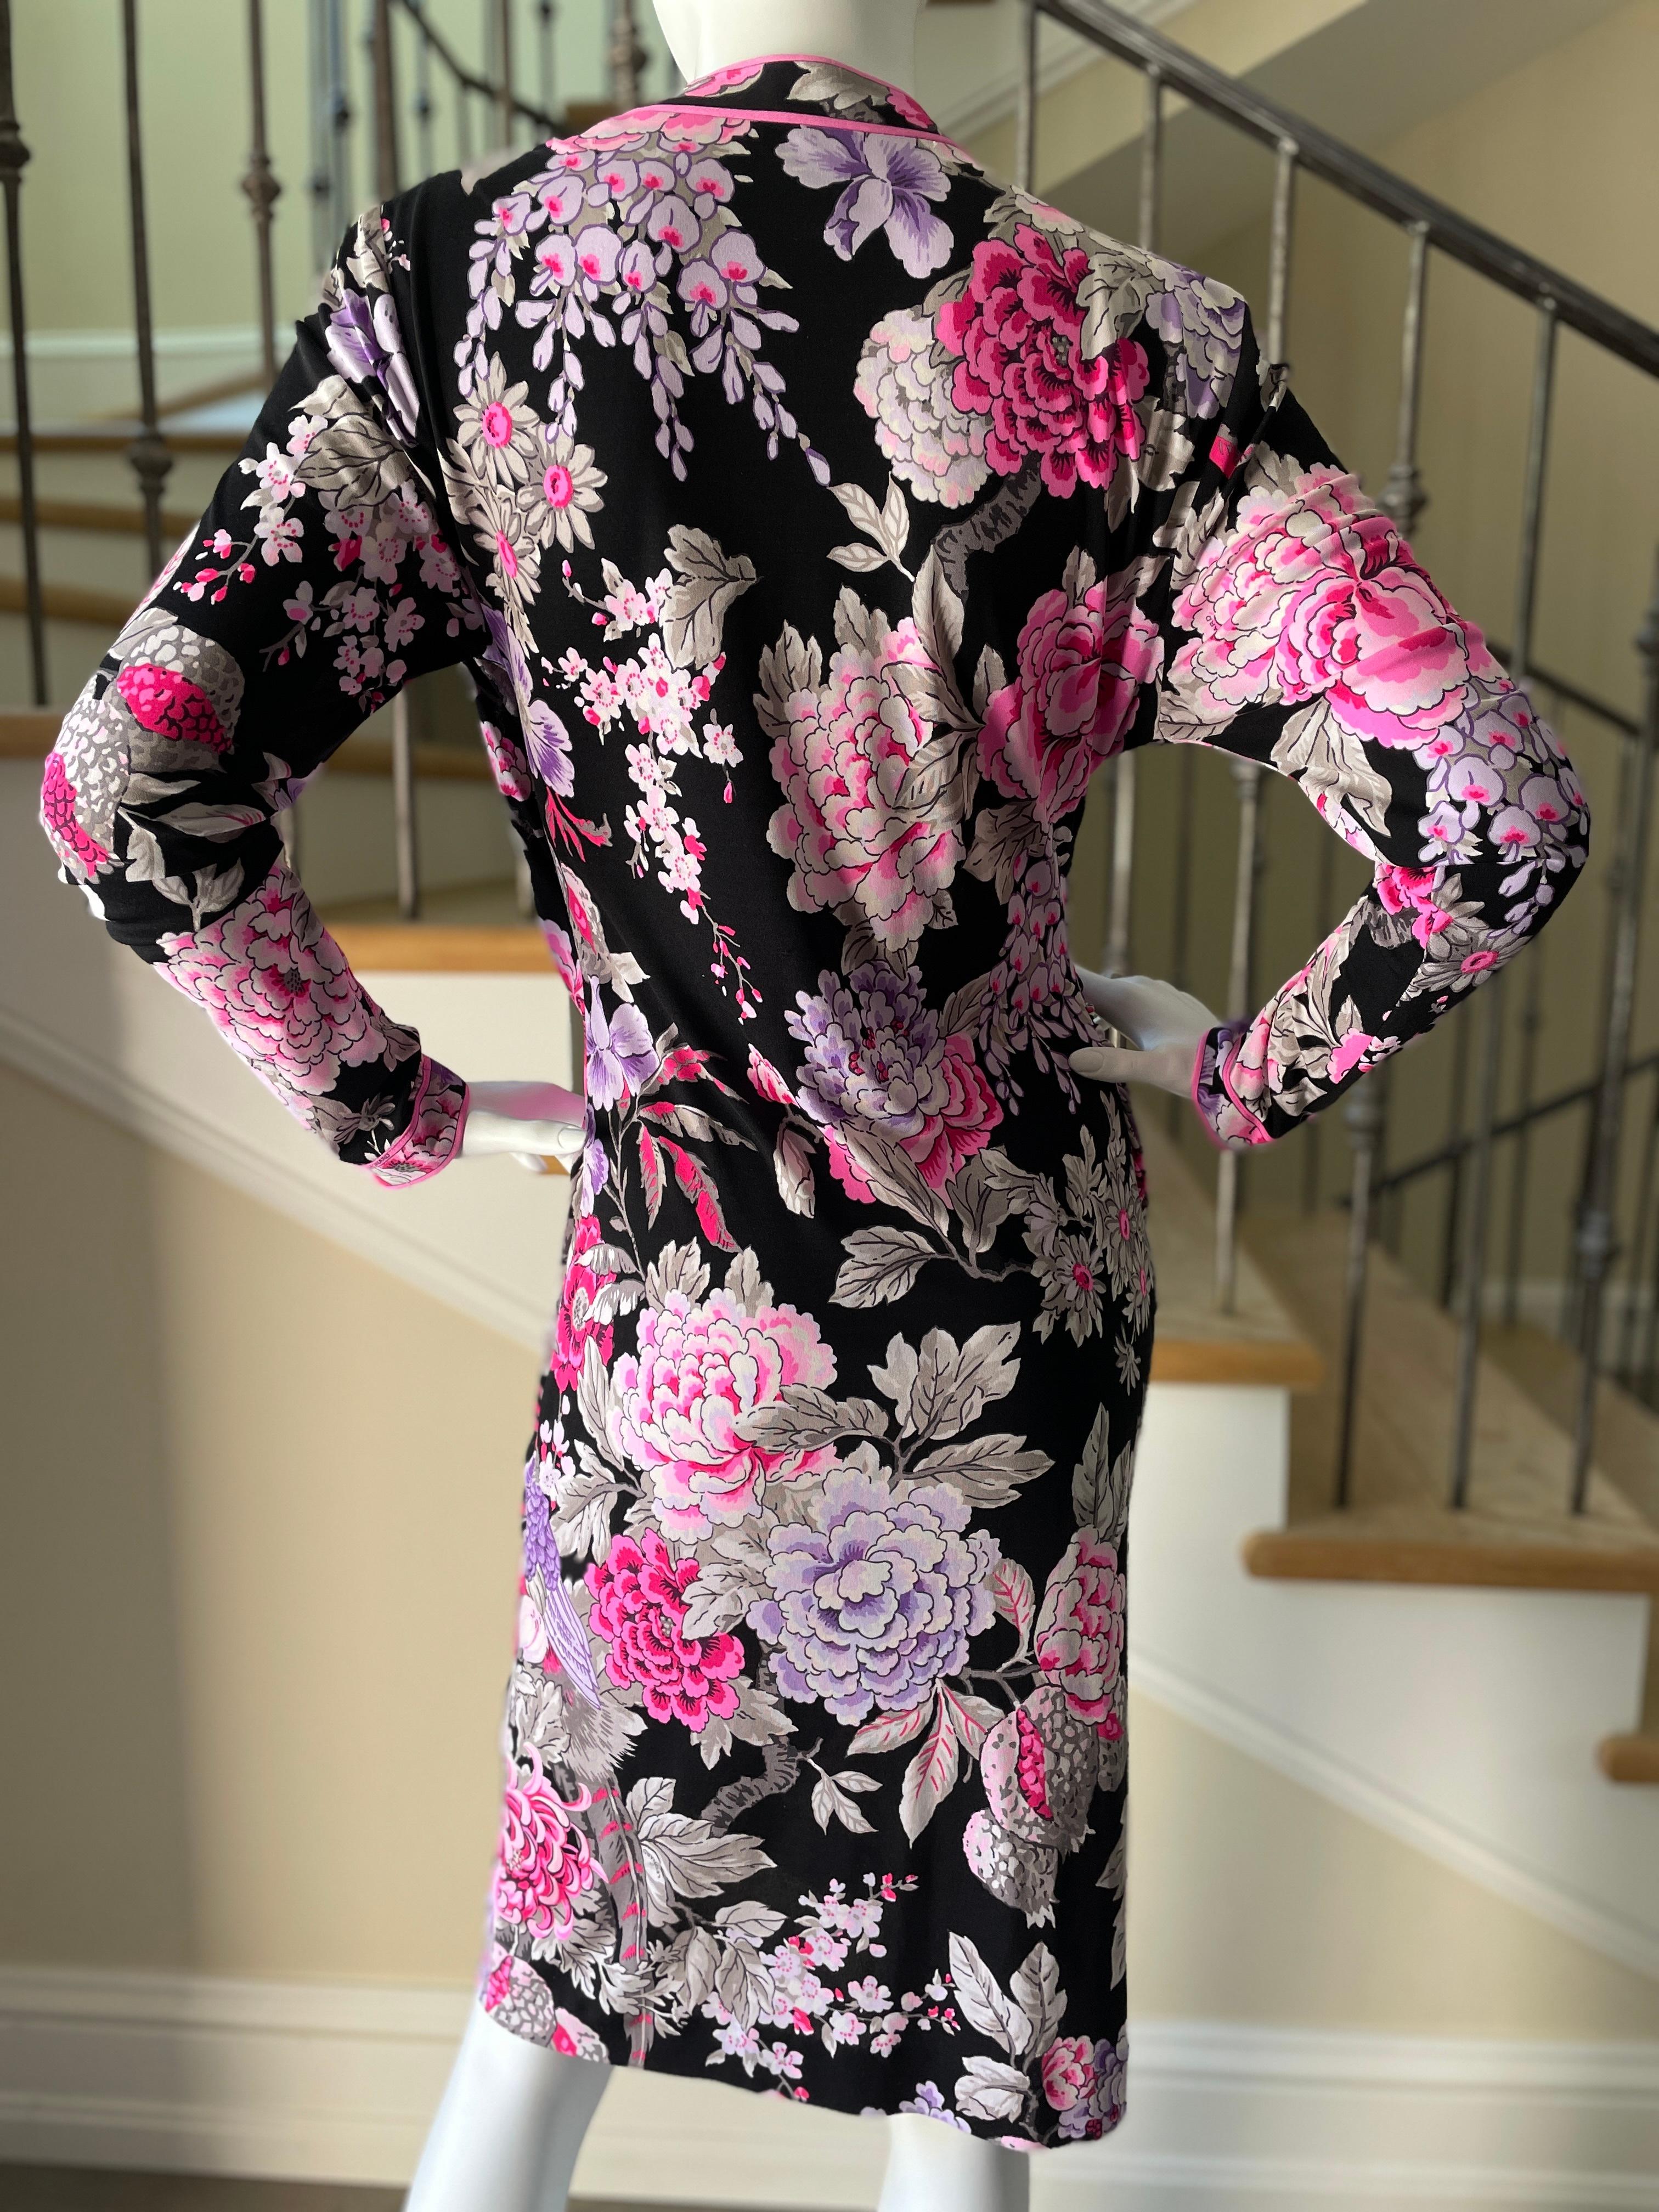  Leonard Paris Vintage 80s Long Sleeve Floral Print Silk Jersey Dress  In Excellent Condition For Sale In Cloverdale, CA